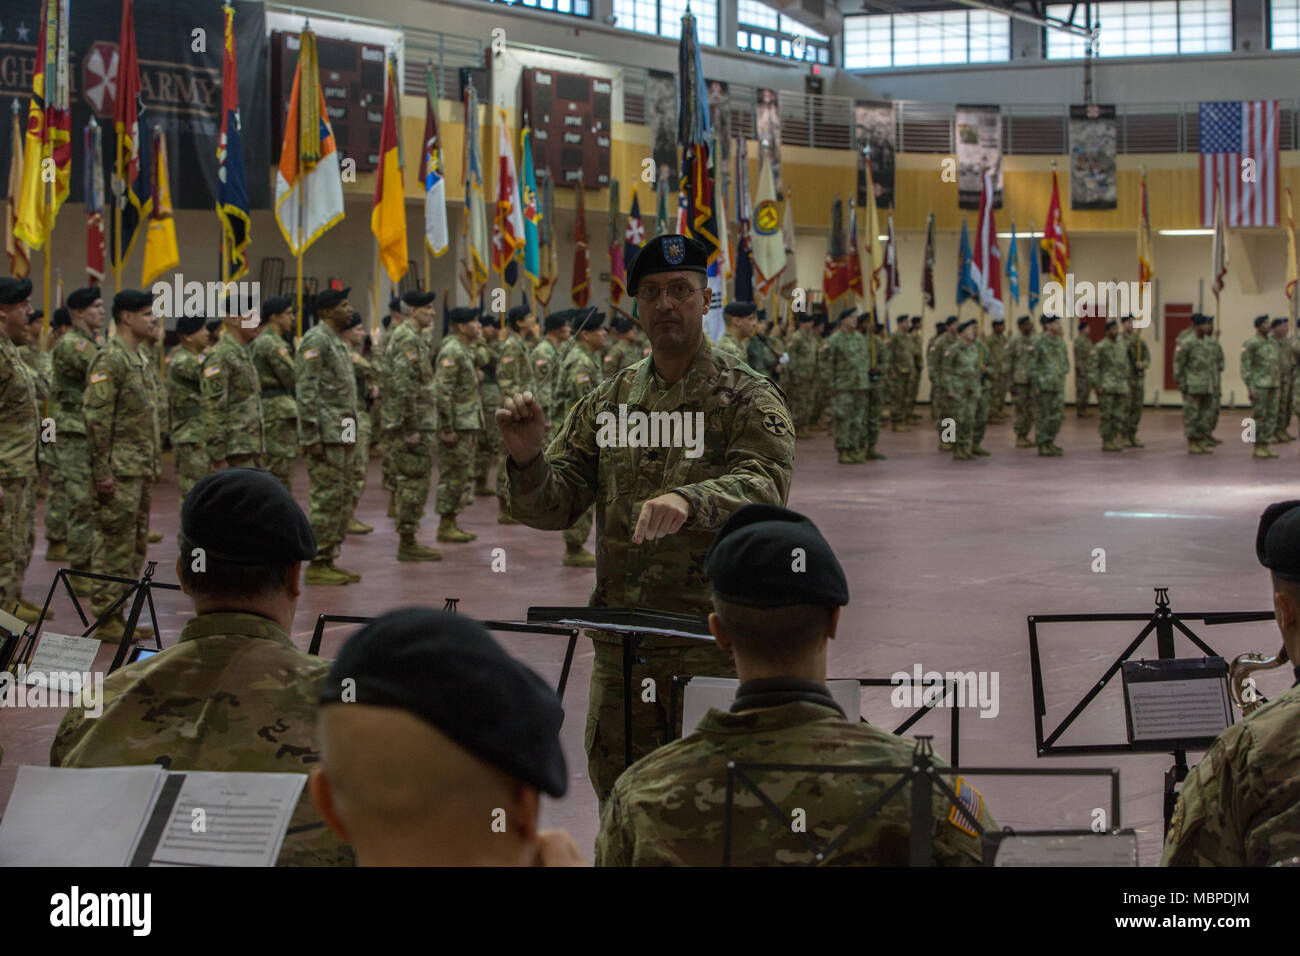 U.S. Army Lt. Col. Treg Ancelet, Eighth Army band conductor, leads the Eighth Army Band through playing of the Eighth Army Song and the Army Song at Camp Humphreys during the Eighth Army change of command ceremony in South Korea, Jan. 5, 2018. Lt. Gen. Thomas S. Vandal relinquished command to Lt. Gen. Michael A. Bills as the new commanding general of Eighth Army. (U.S. Army photo by Pfc. Isaih Vega) Stock Photo